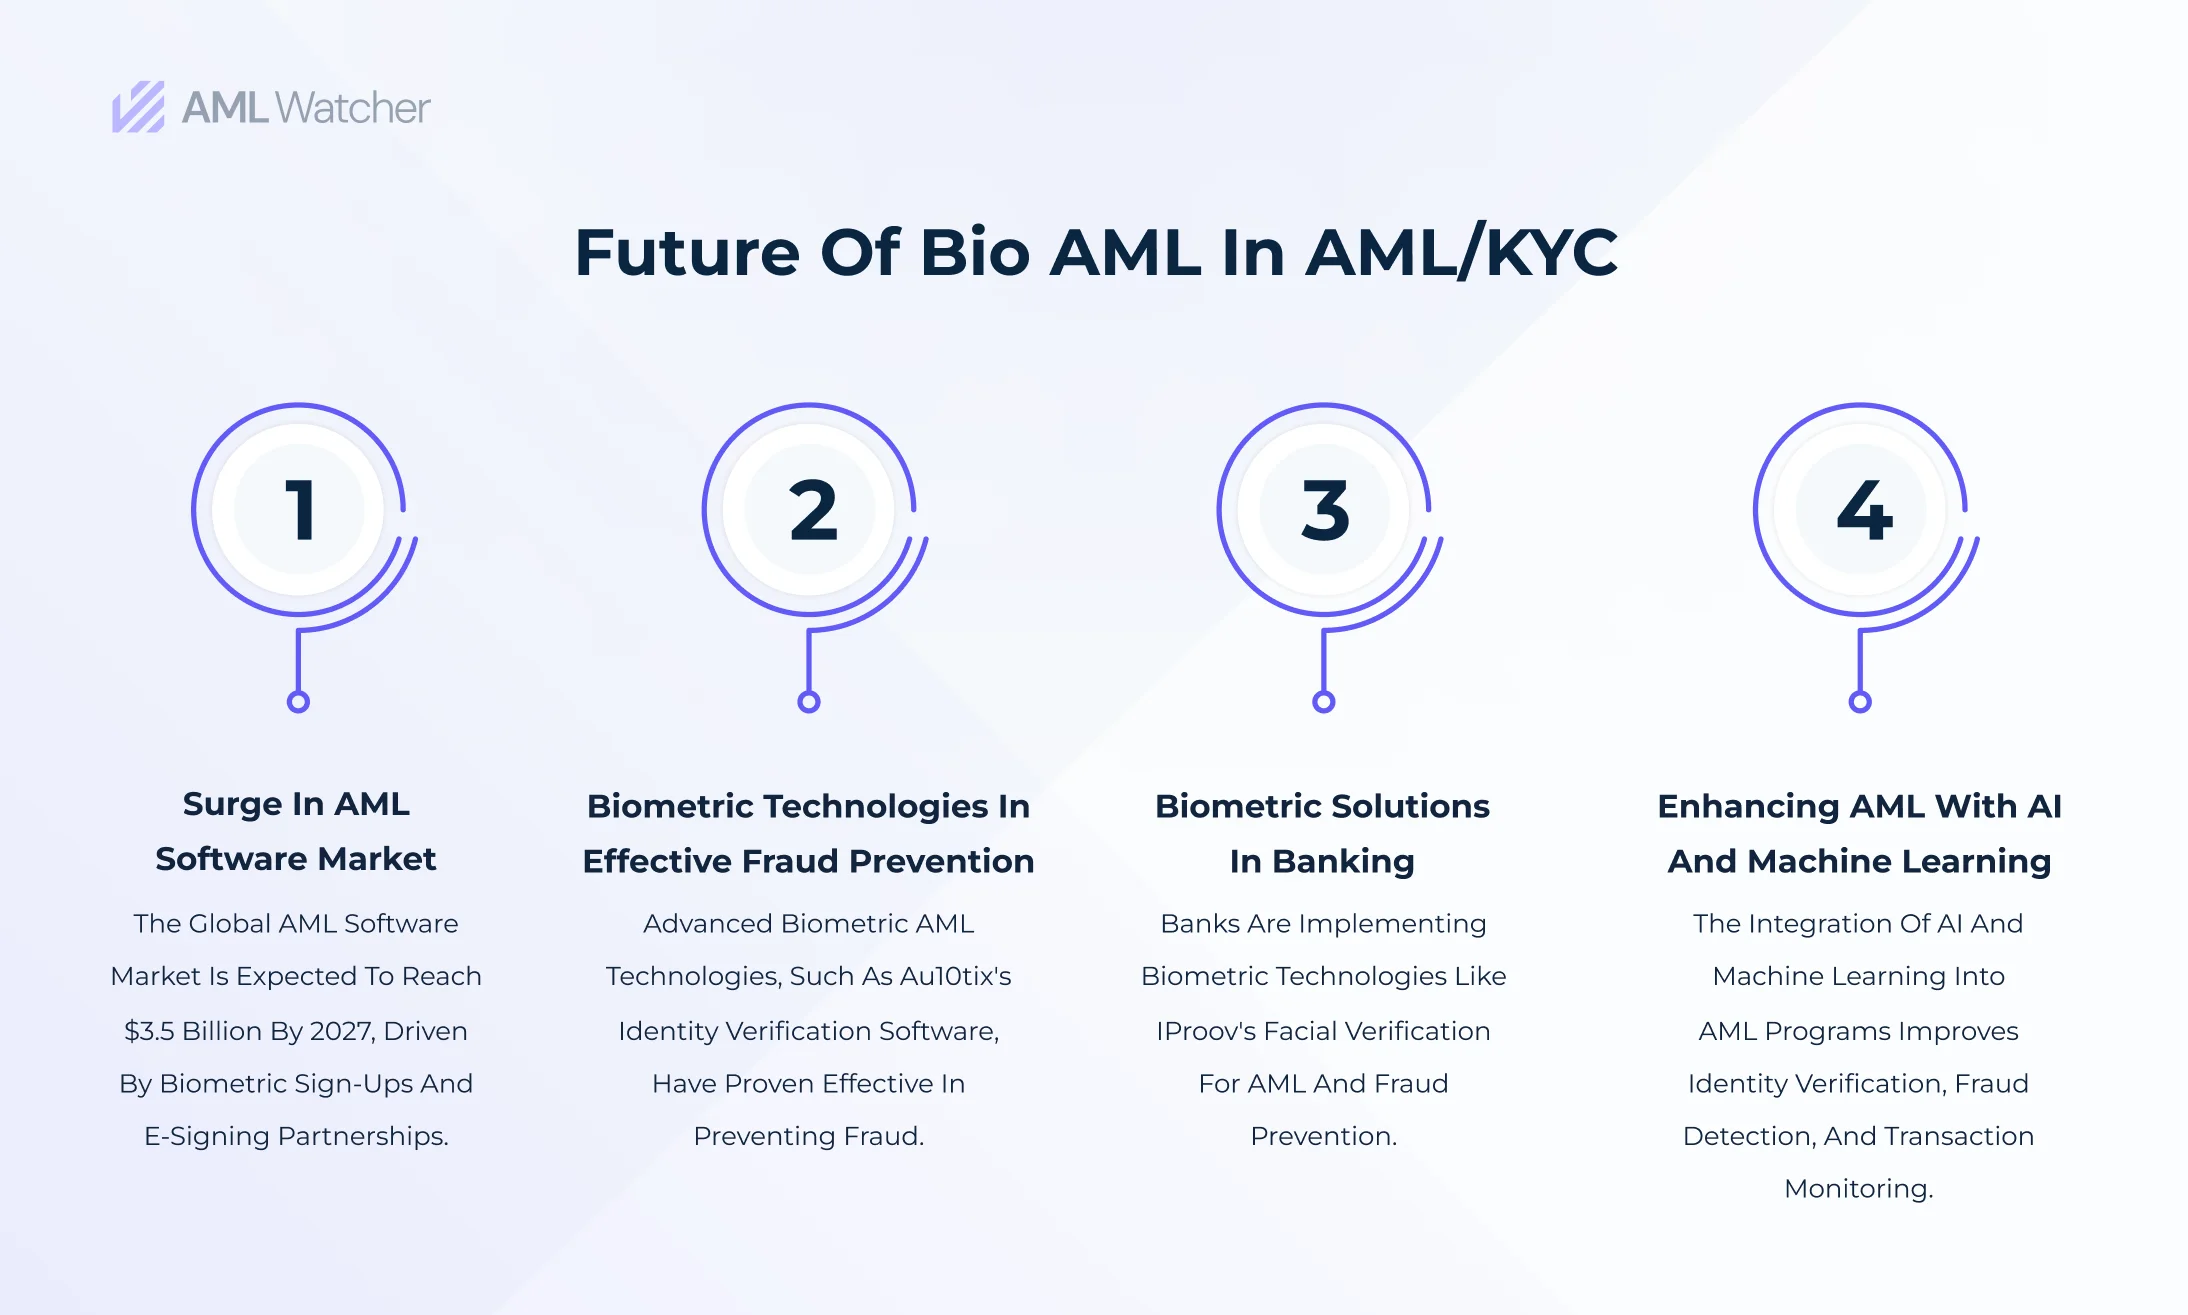 Future changes in biometric AML technology involves the use of AI, market growth, fraud prevention, and application in banking. 